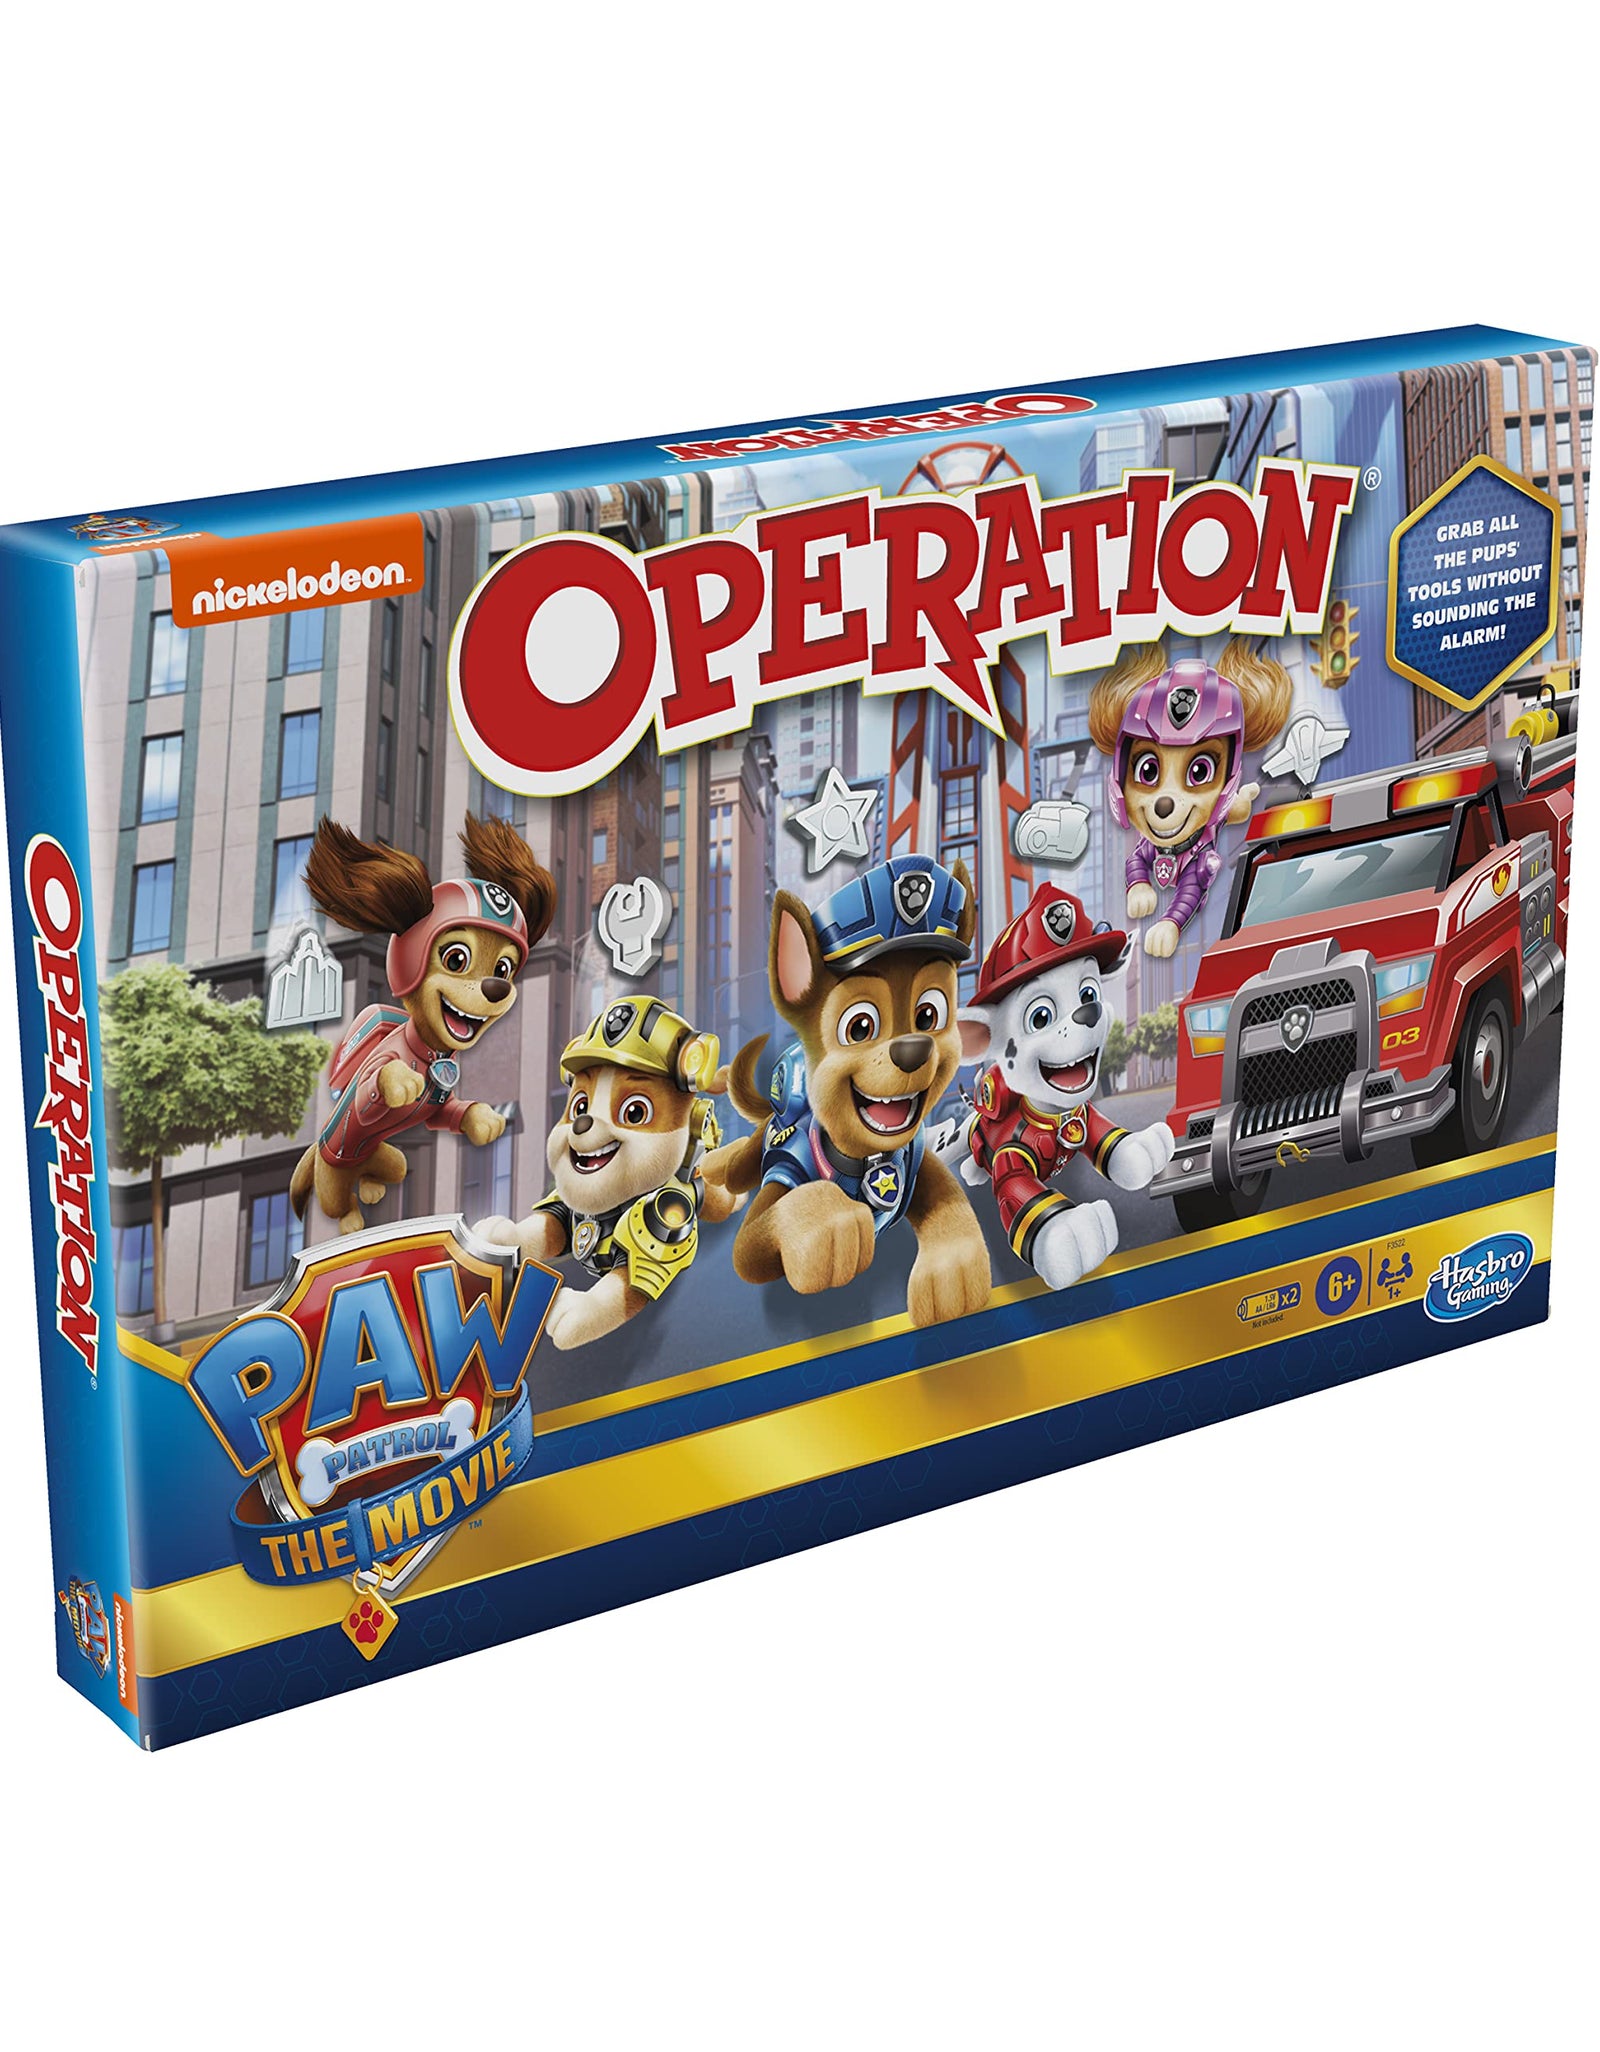 Operation Game: Paw Patrol The Movie Edition Board Game for Kids Ages 6 and Up, Nickelodeon Paw Patrol Game for 1 or More Players